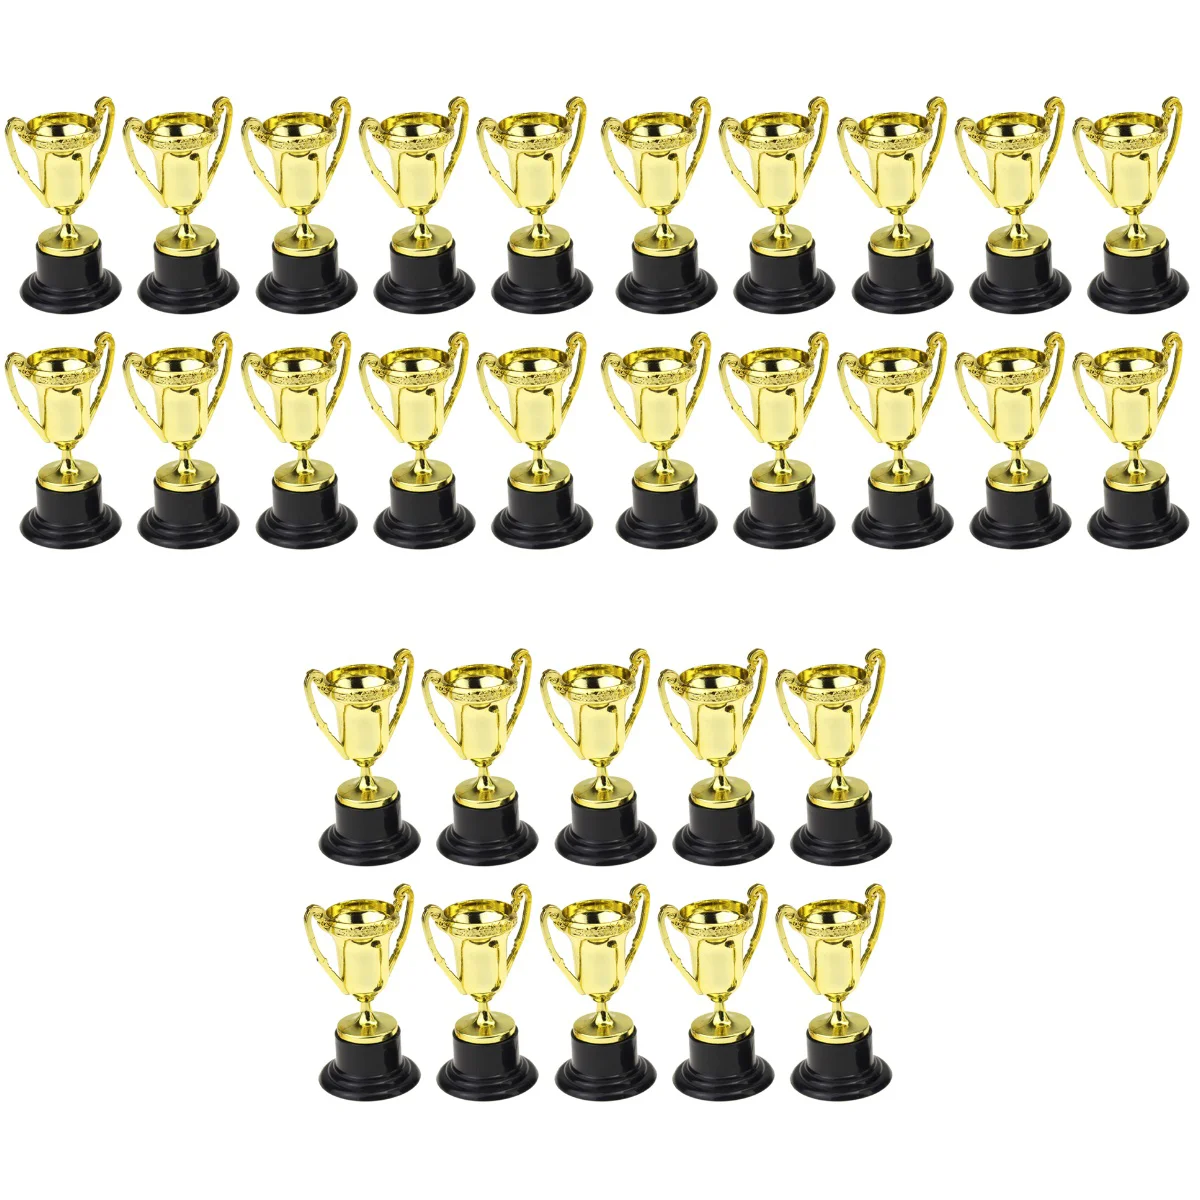 30 PCS  Mini Plastic Gold Cups Trophies for Party Children Early Learning Toys Prizes